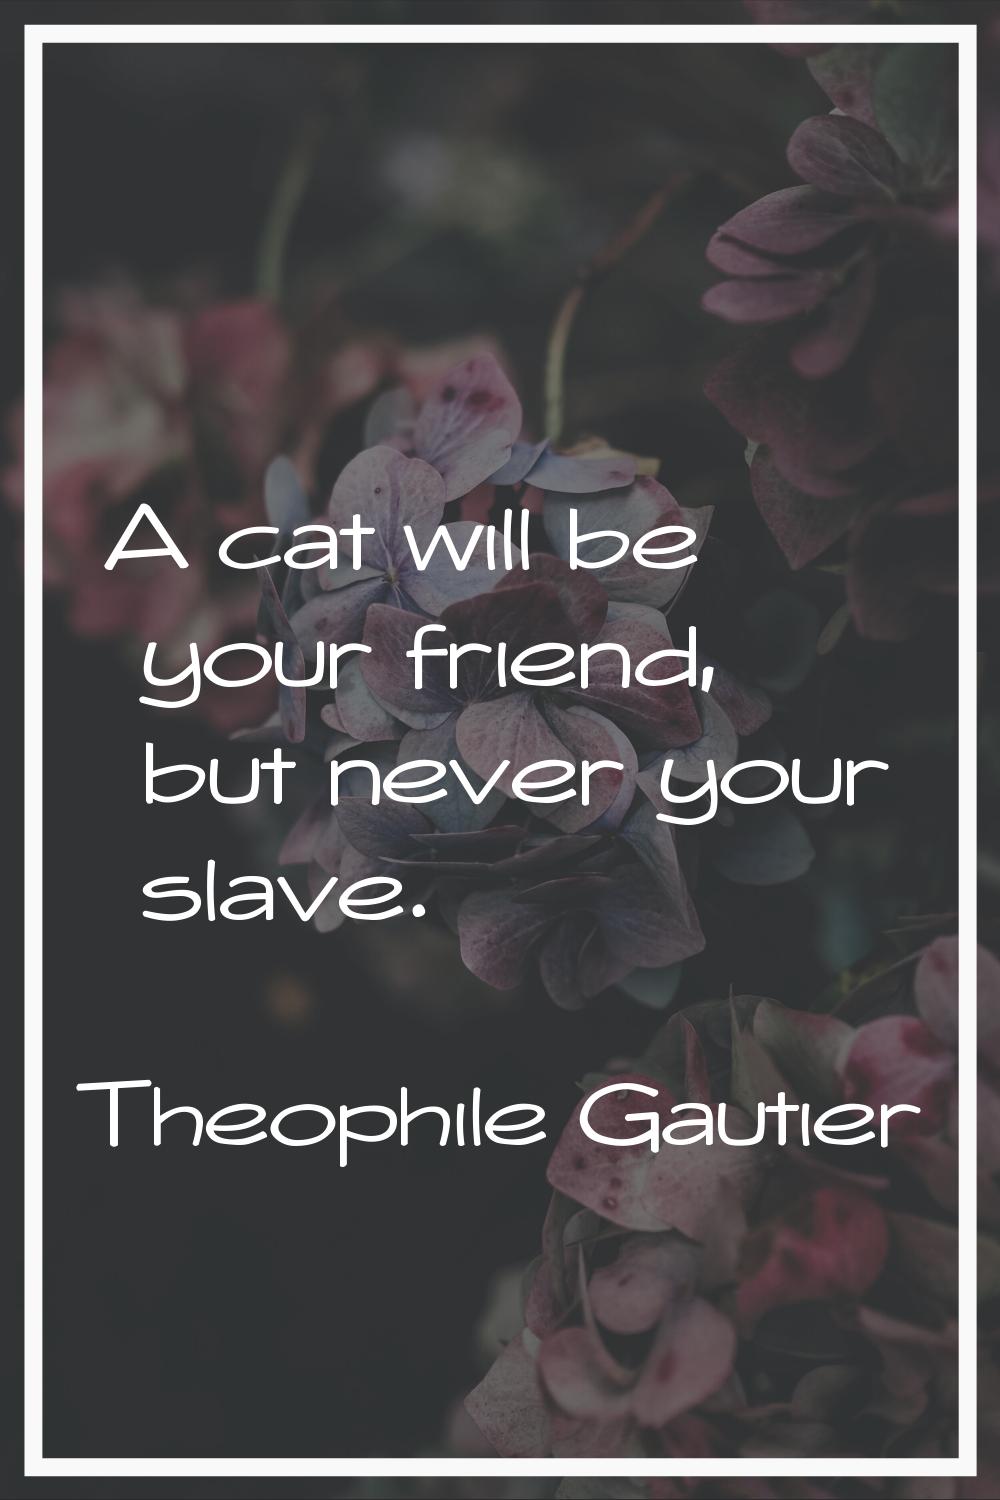 A cat will be your friend, but never your slave.